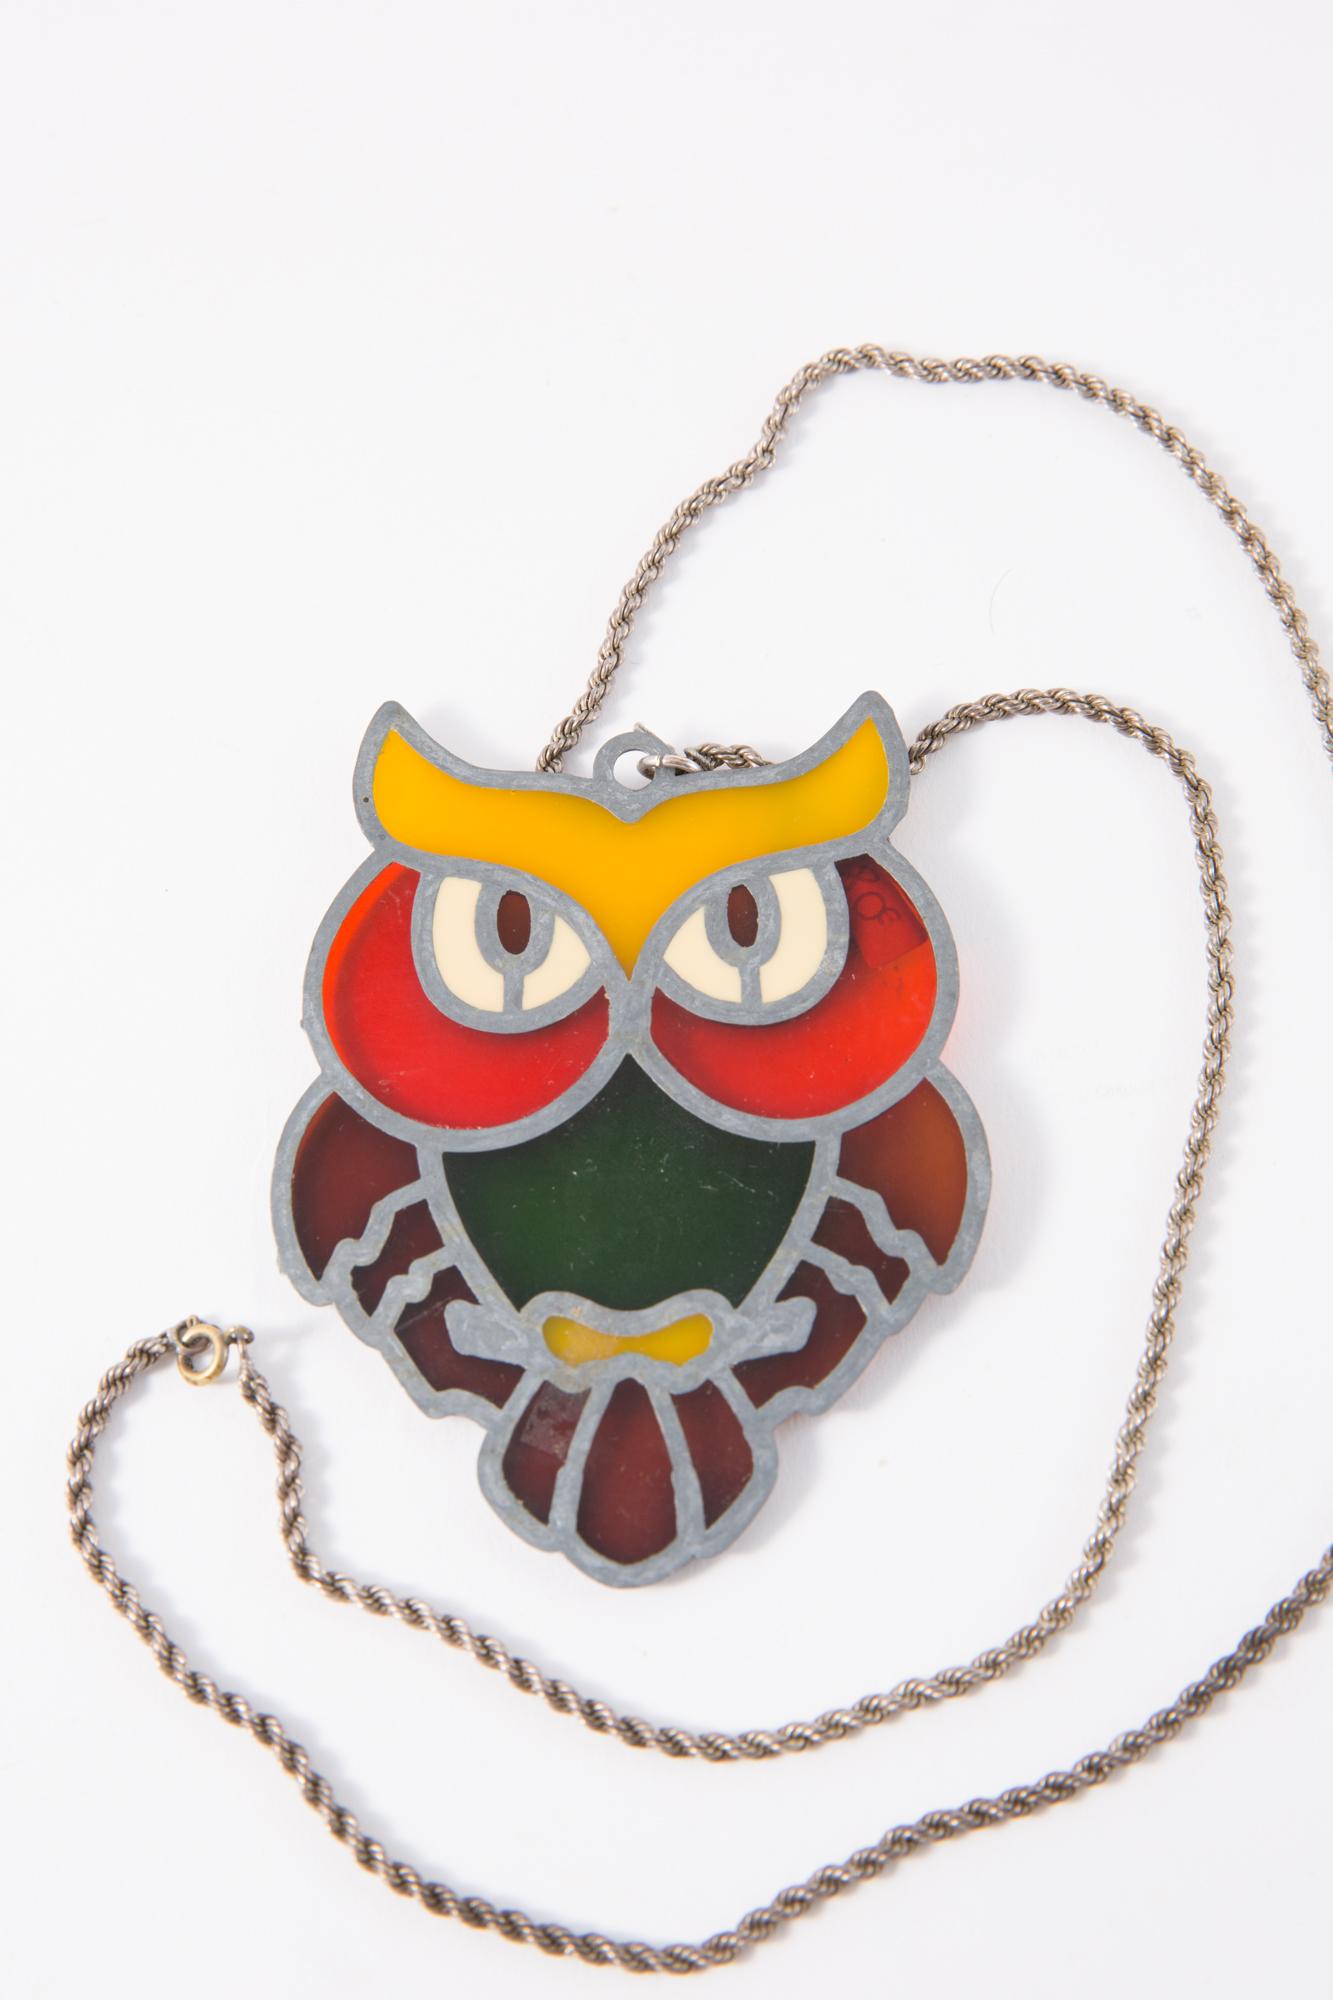 1960s multicolored large owl in stained glass effect necklace featuring a silver tone chain, a large owl size.
In good vintage condition   
Maxi Length chain: 25.1in. (64 cm)
Owl Maxi Length:3.5in. (9cm)
Owl Maxi Width: 2.7in (7cm)
We guarantee you